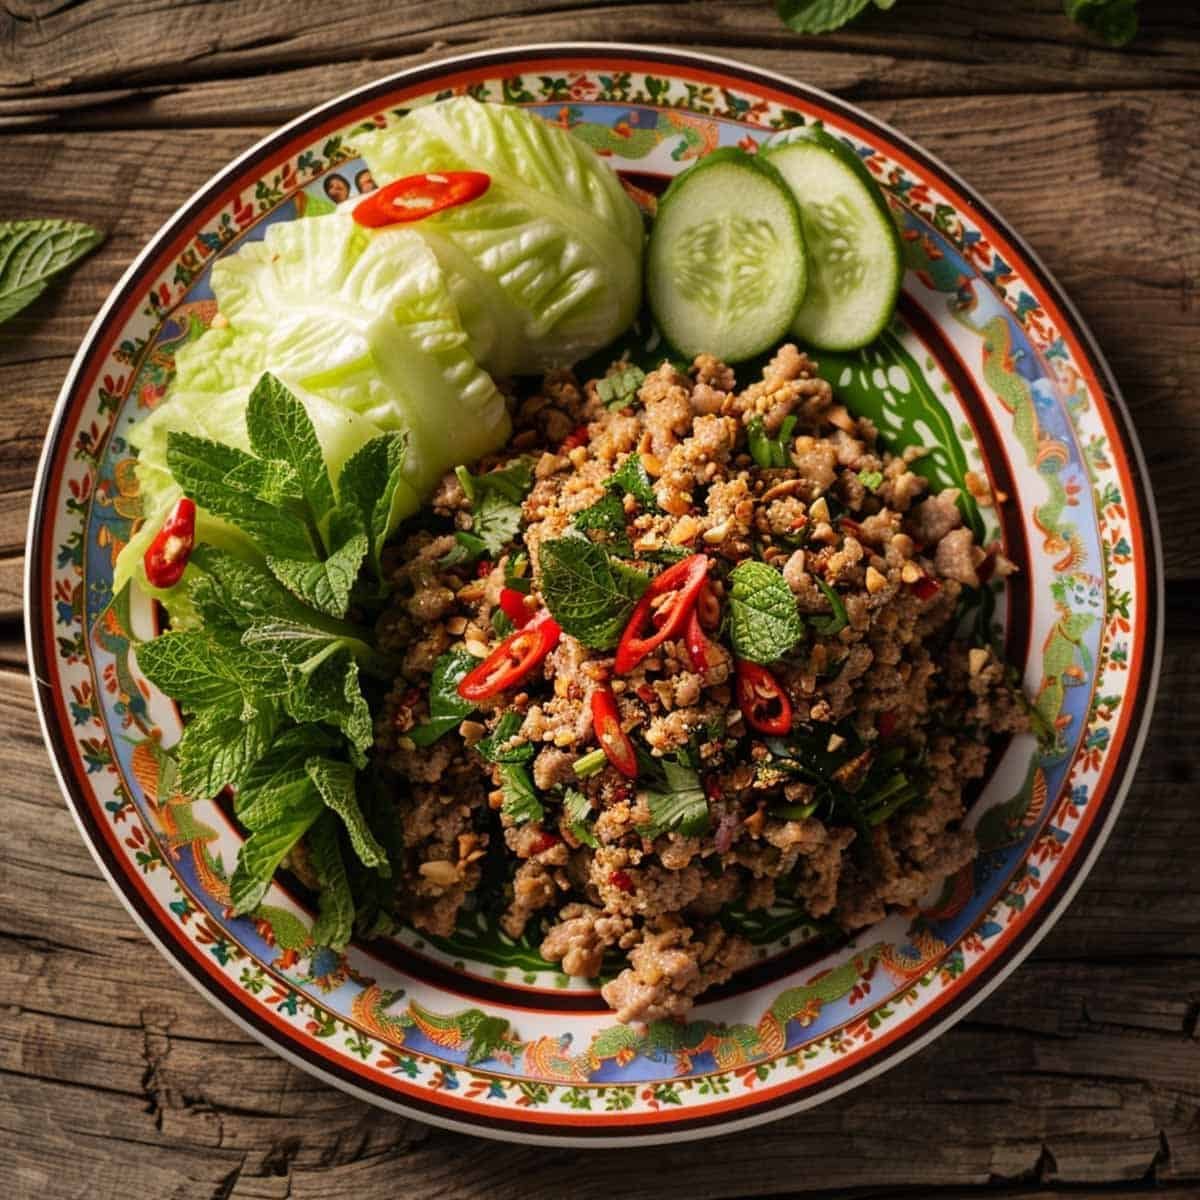 A plate of Larb, also known as Laab, featuring finely minced meat mixed with fresh herbs like mint and cilantro, sprinkled with toasted ground rice, and seasoned with lime juice and chili flakes, served with a side of crisp lettuce leaves.